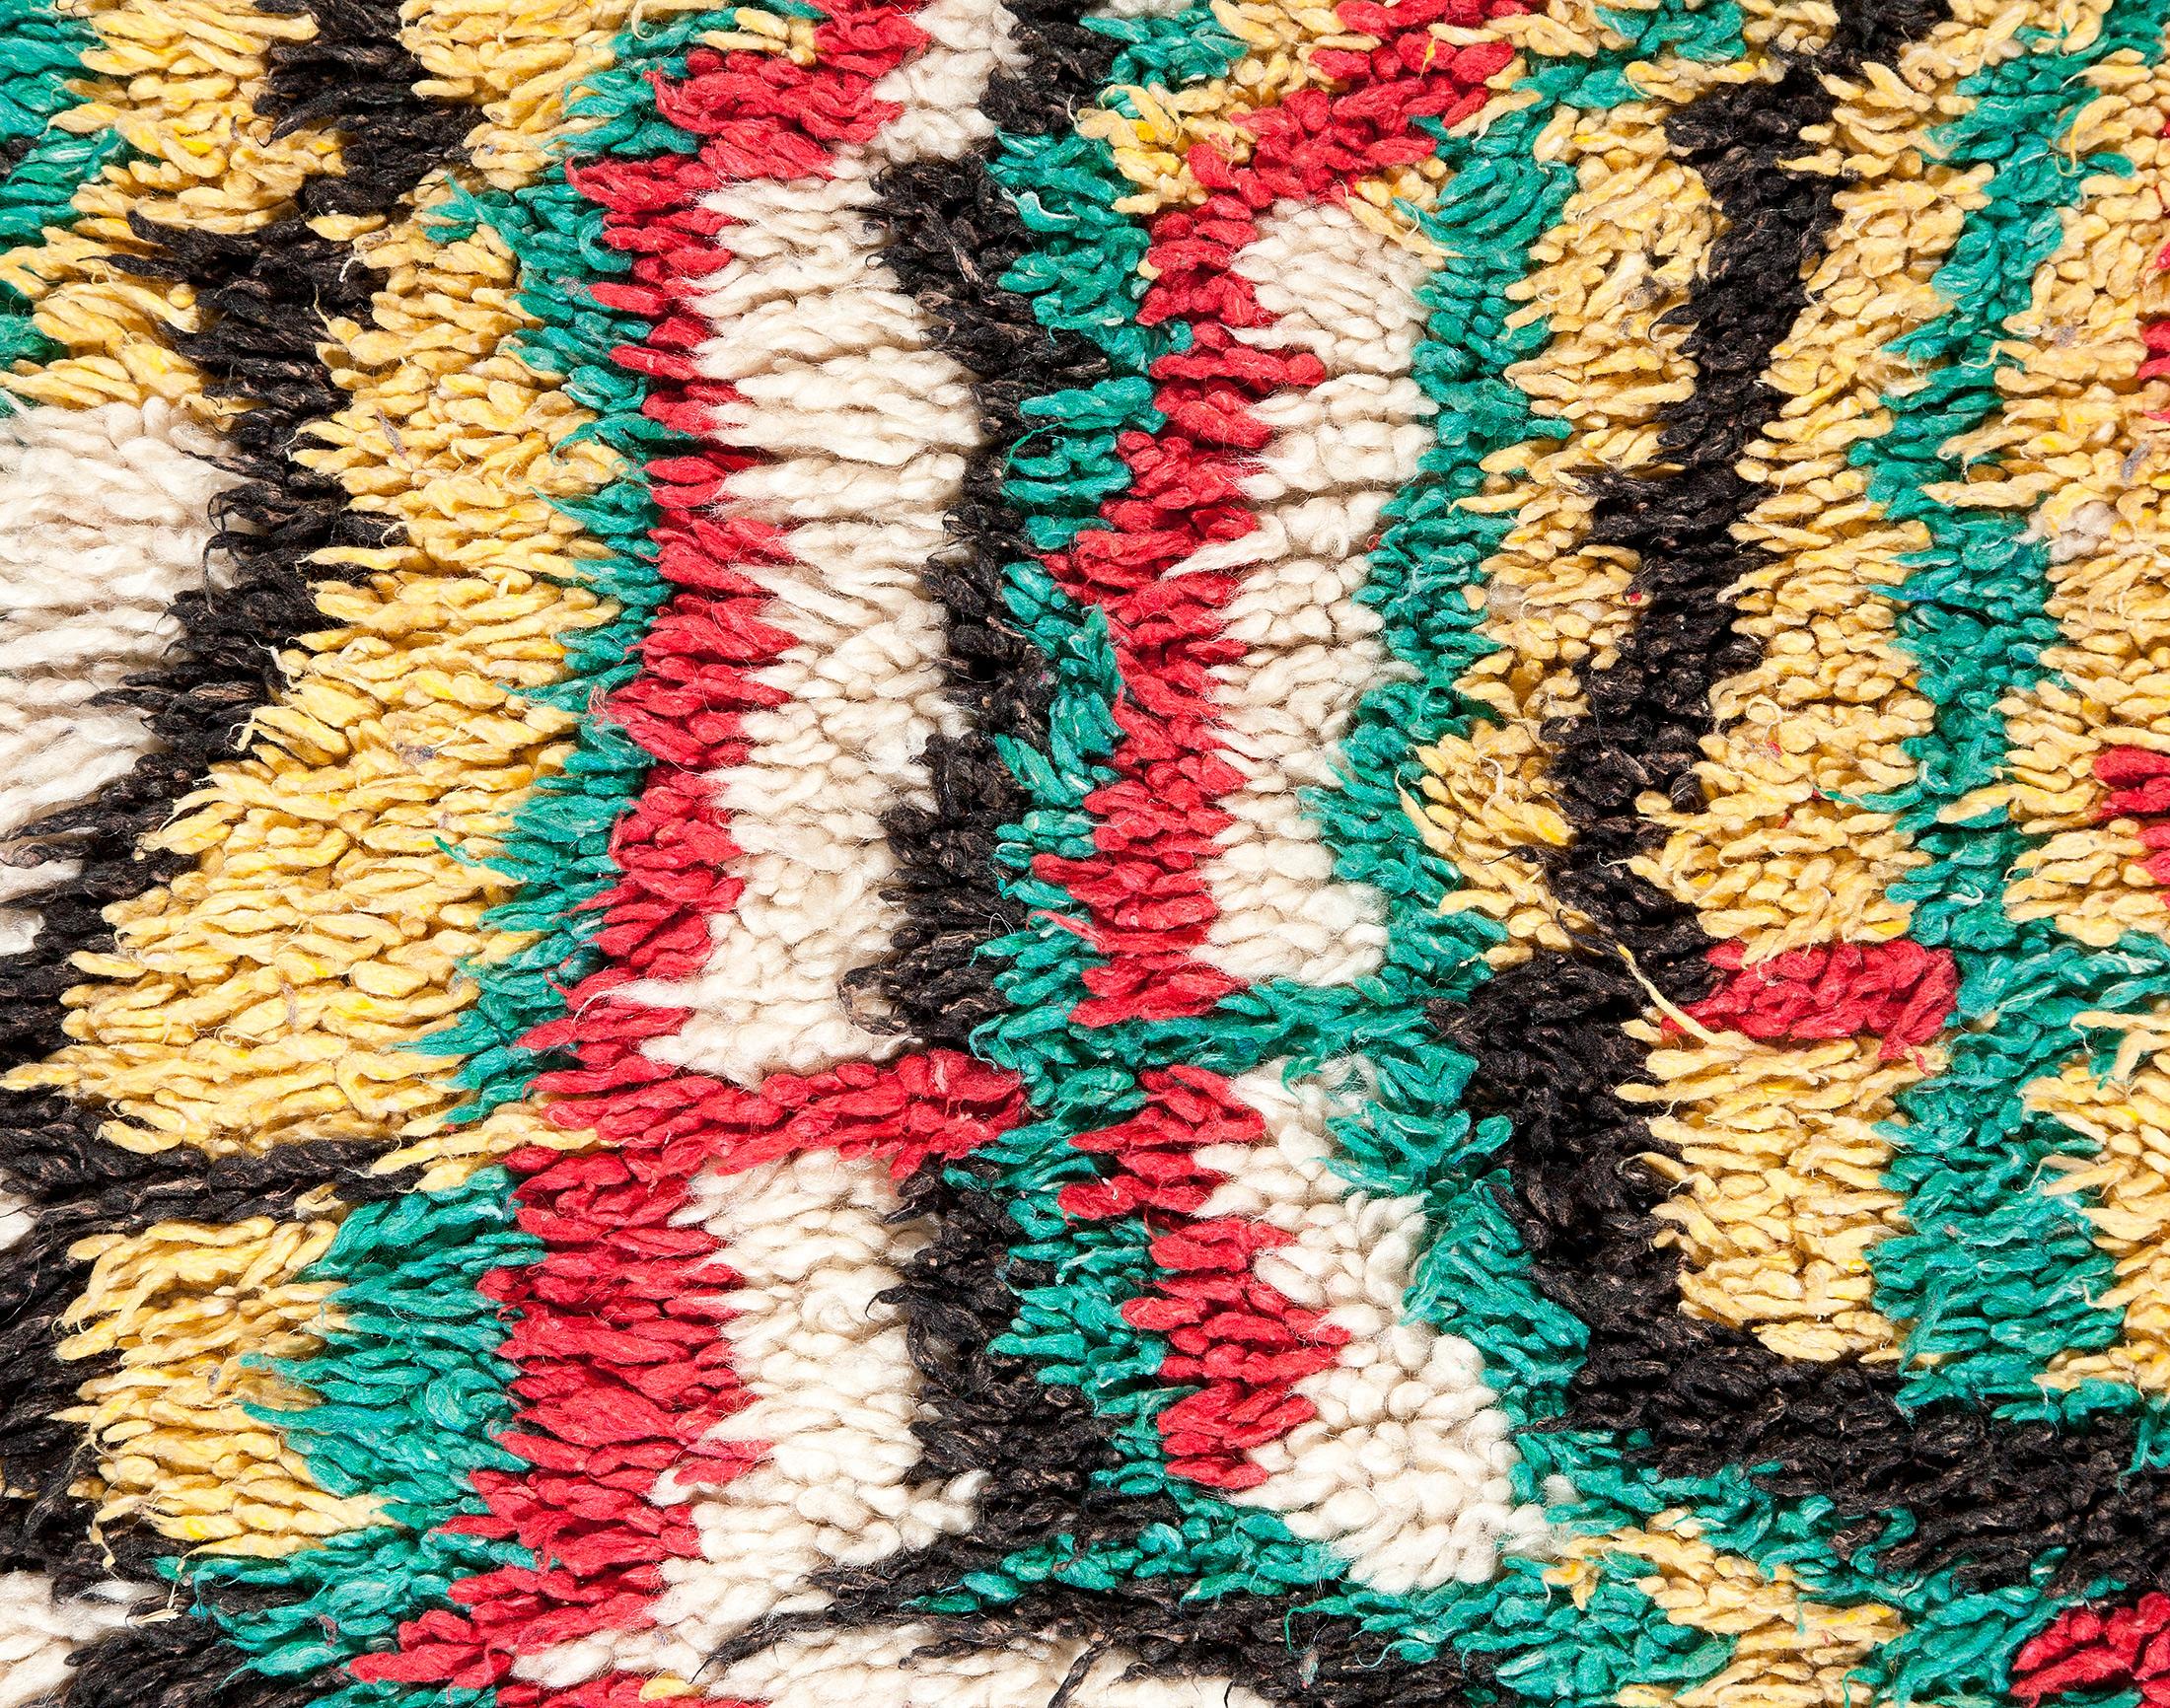 Classical Moroccan Berber rug from the Azilal region. Black, red, yellow, blue, green and off-white patterns. Medium-short pile.

This is an authentic Berber carpet from Morocco. In Berber tribes rugs are hand knotted by women in mainly for their